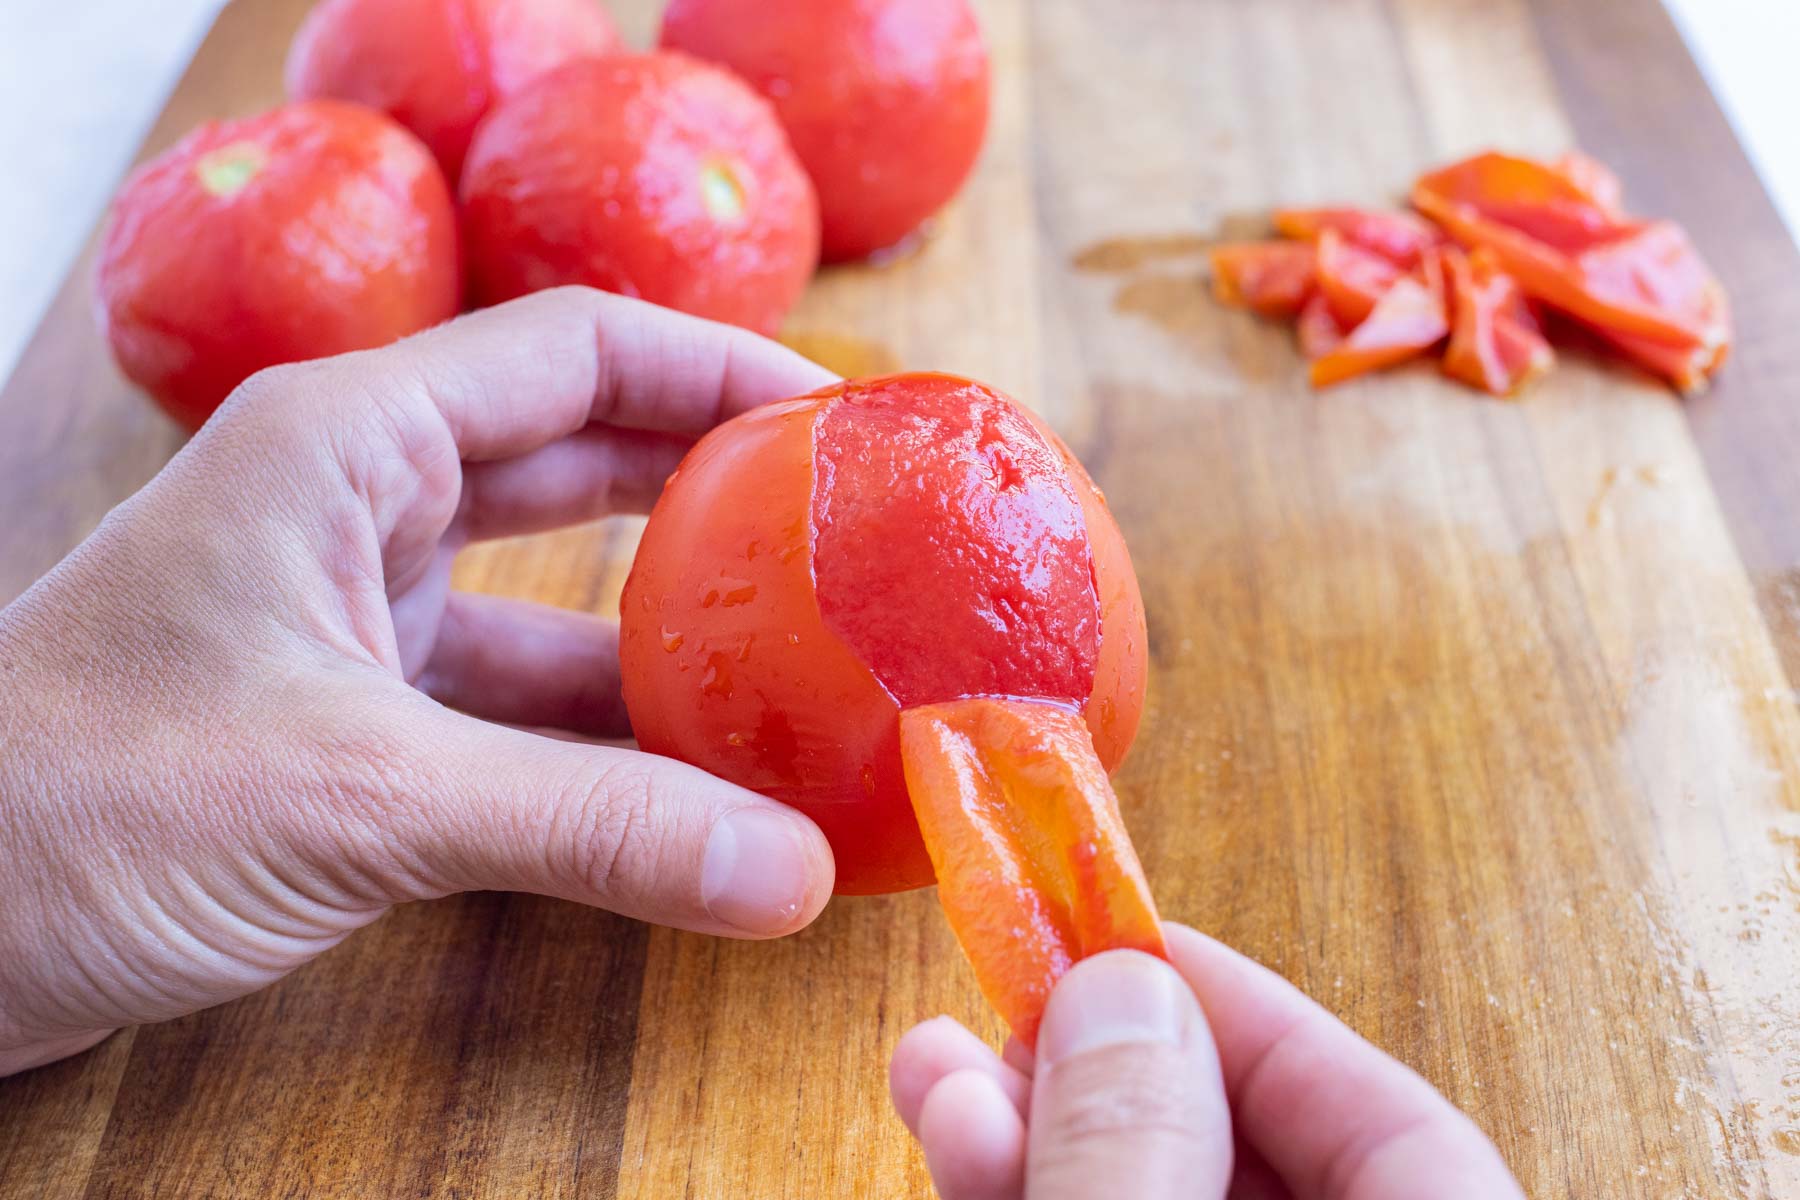 It is simple to carefully remove the skin of a tomato after par-boiling.